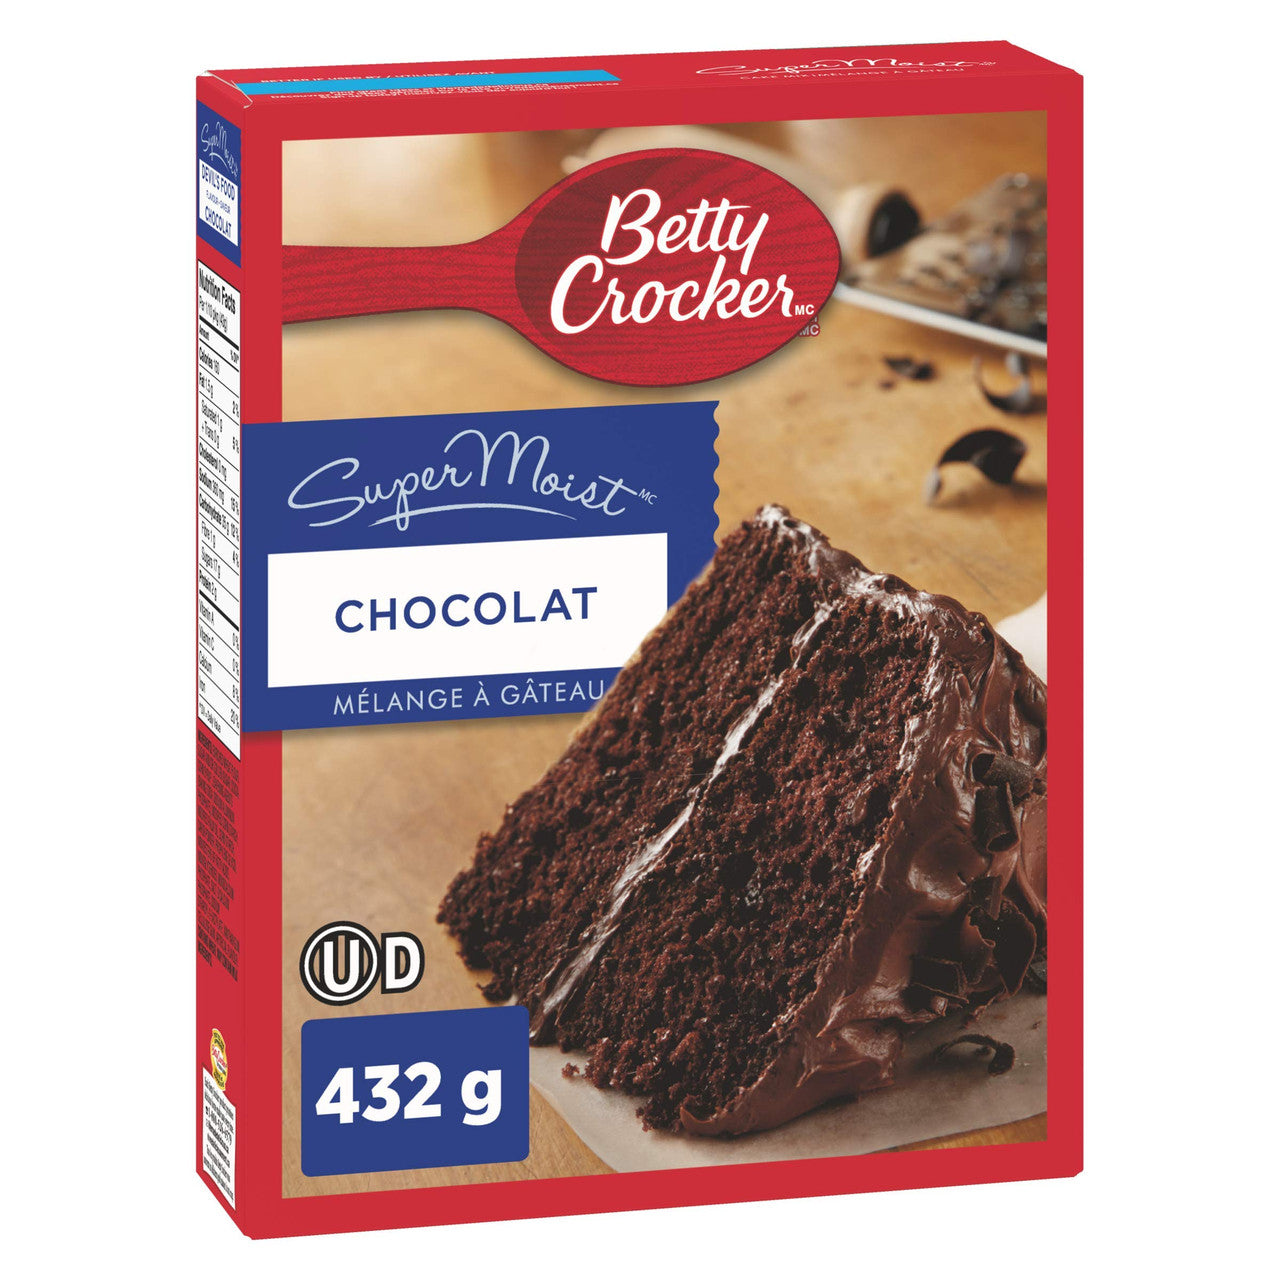 Betty Crocker Devil's Food Super Moist Cake Mix, 432g/15oz., {Imported from Canada}